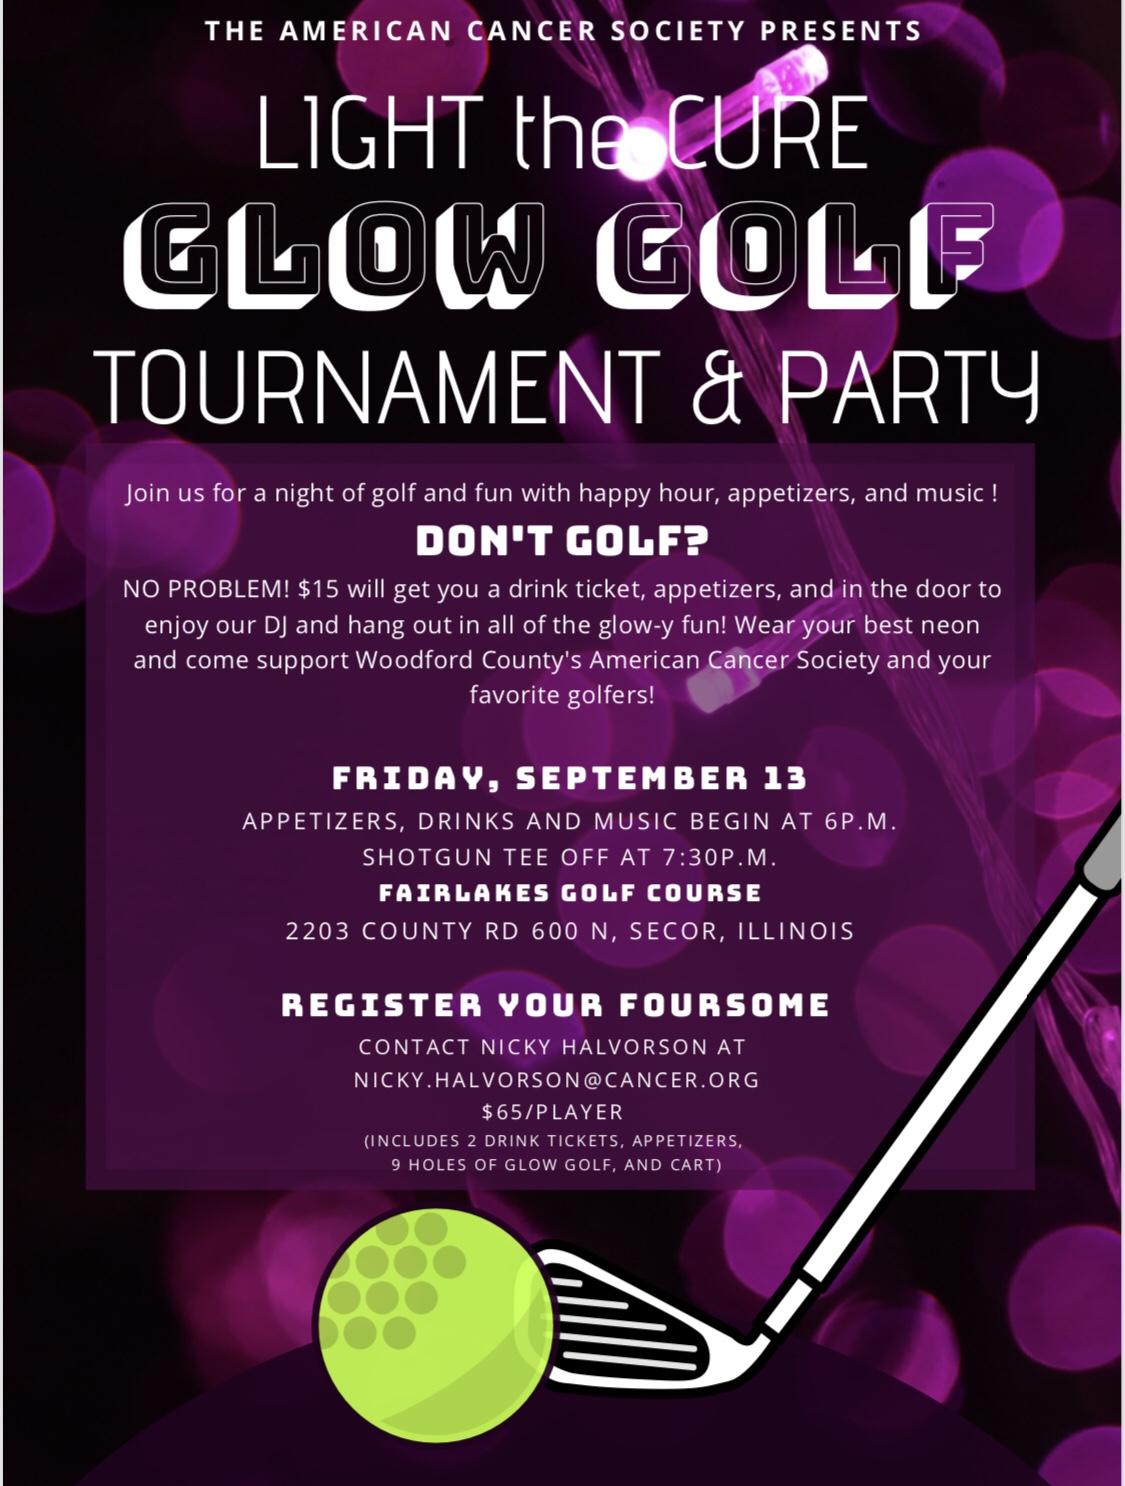 American Cancer Society's Light the Cure Glow Golf Scramble